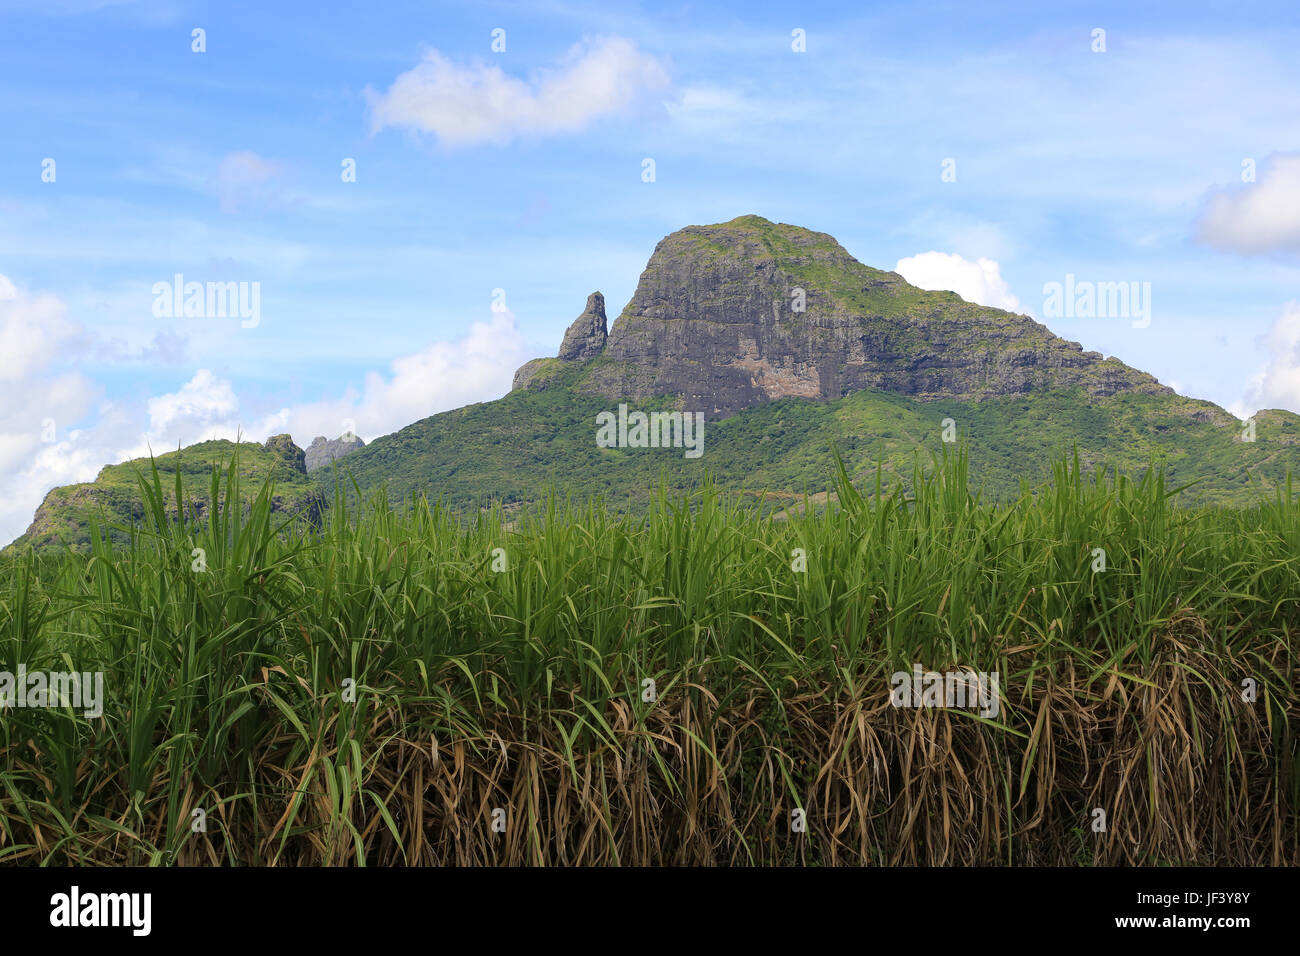 Landscape at Mauritius with sugar cane Stock Photo